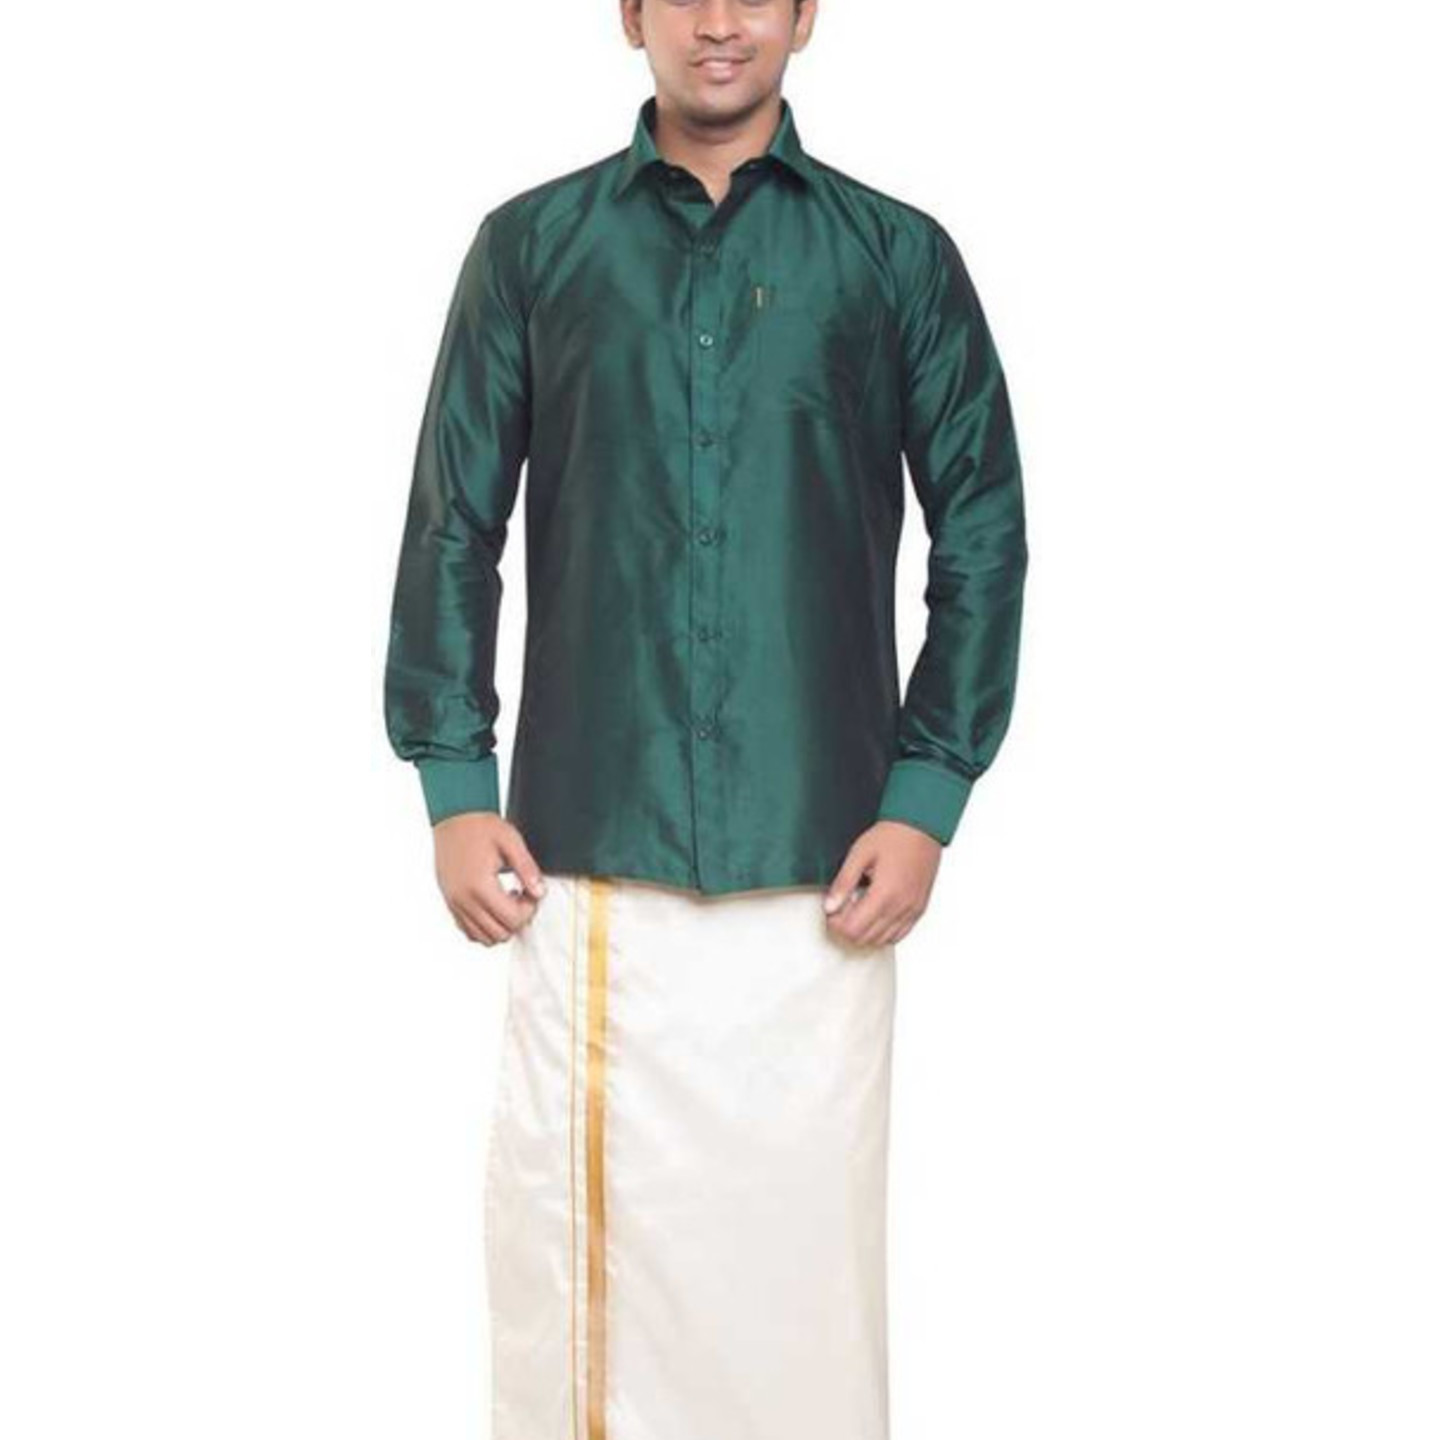 Indian Men Ethnic Clothing Buy Indian Marriage Outfits Online